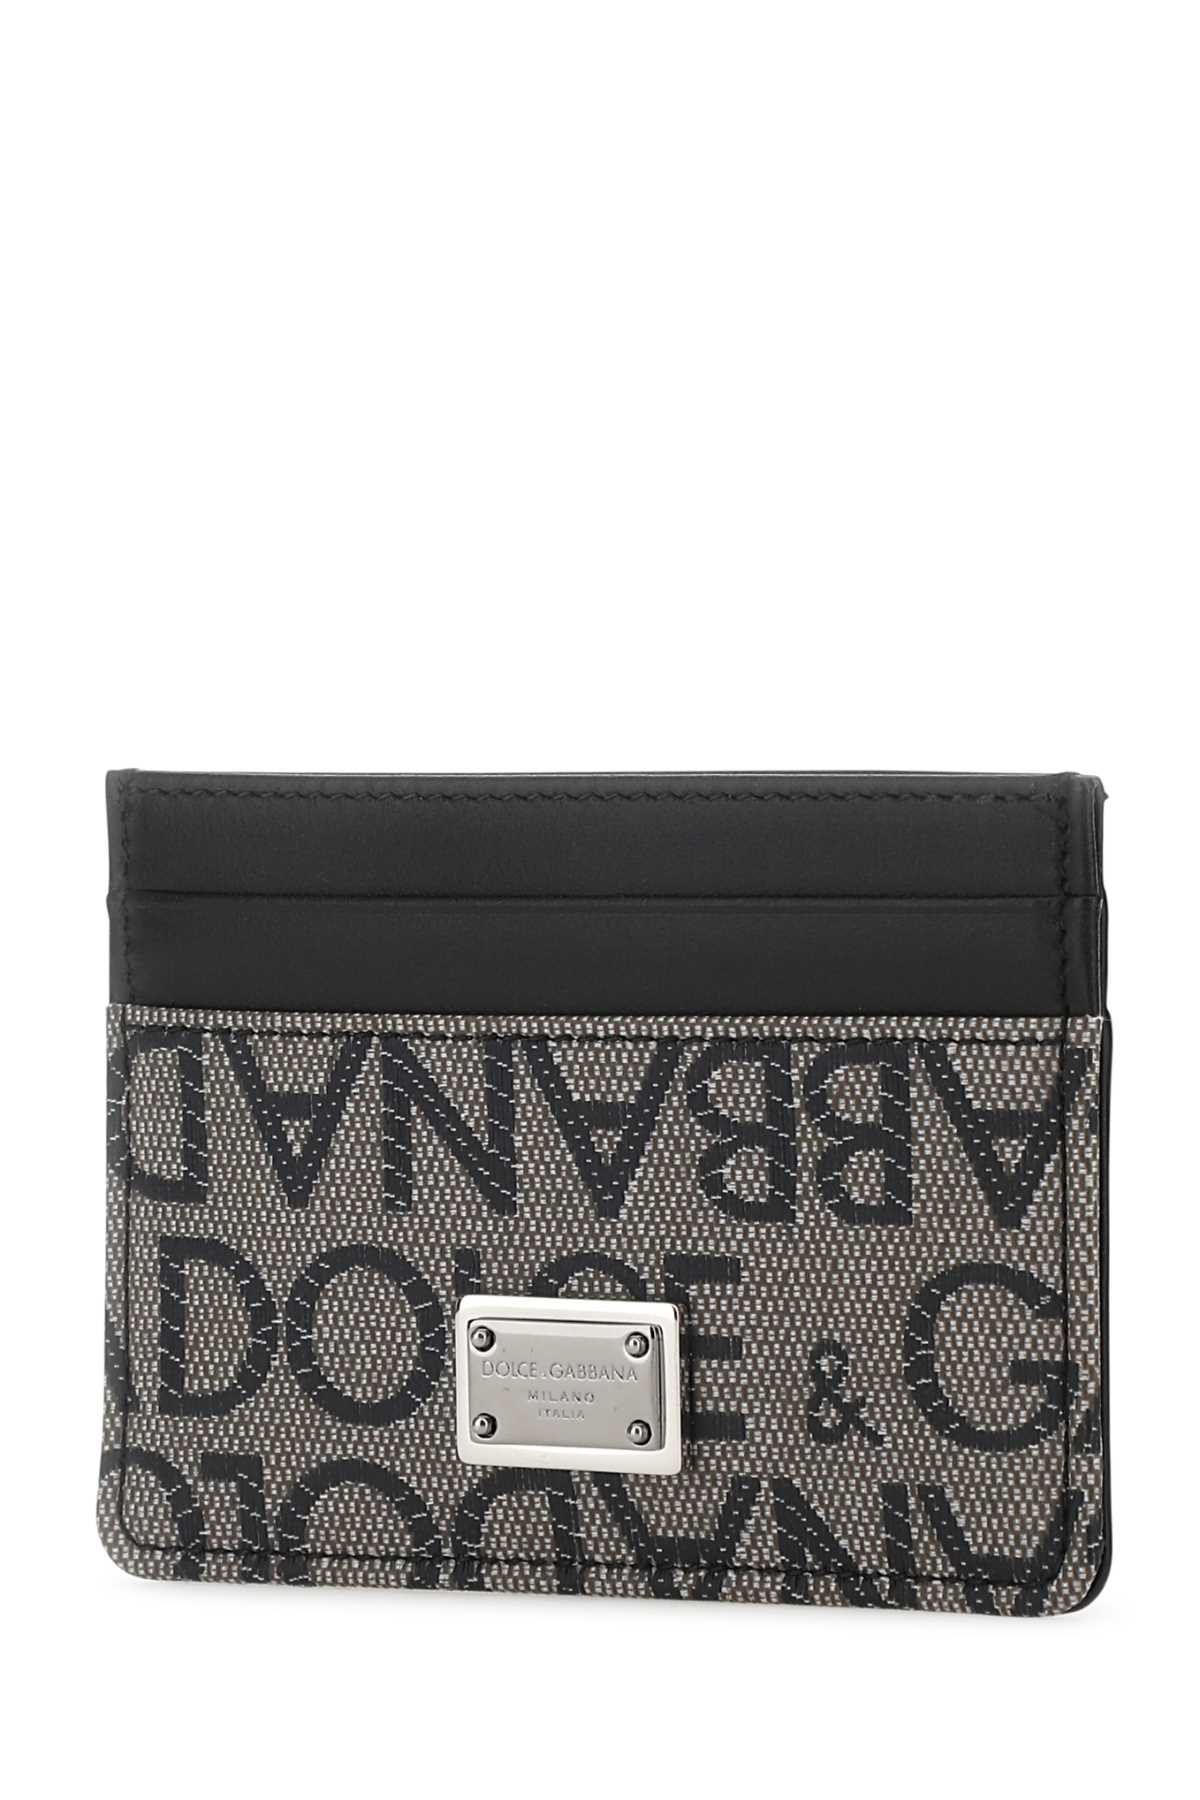 DOLCE & GABBANA MULTICOLOR LEATHER AND FABRIC CARD HOLDER